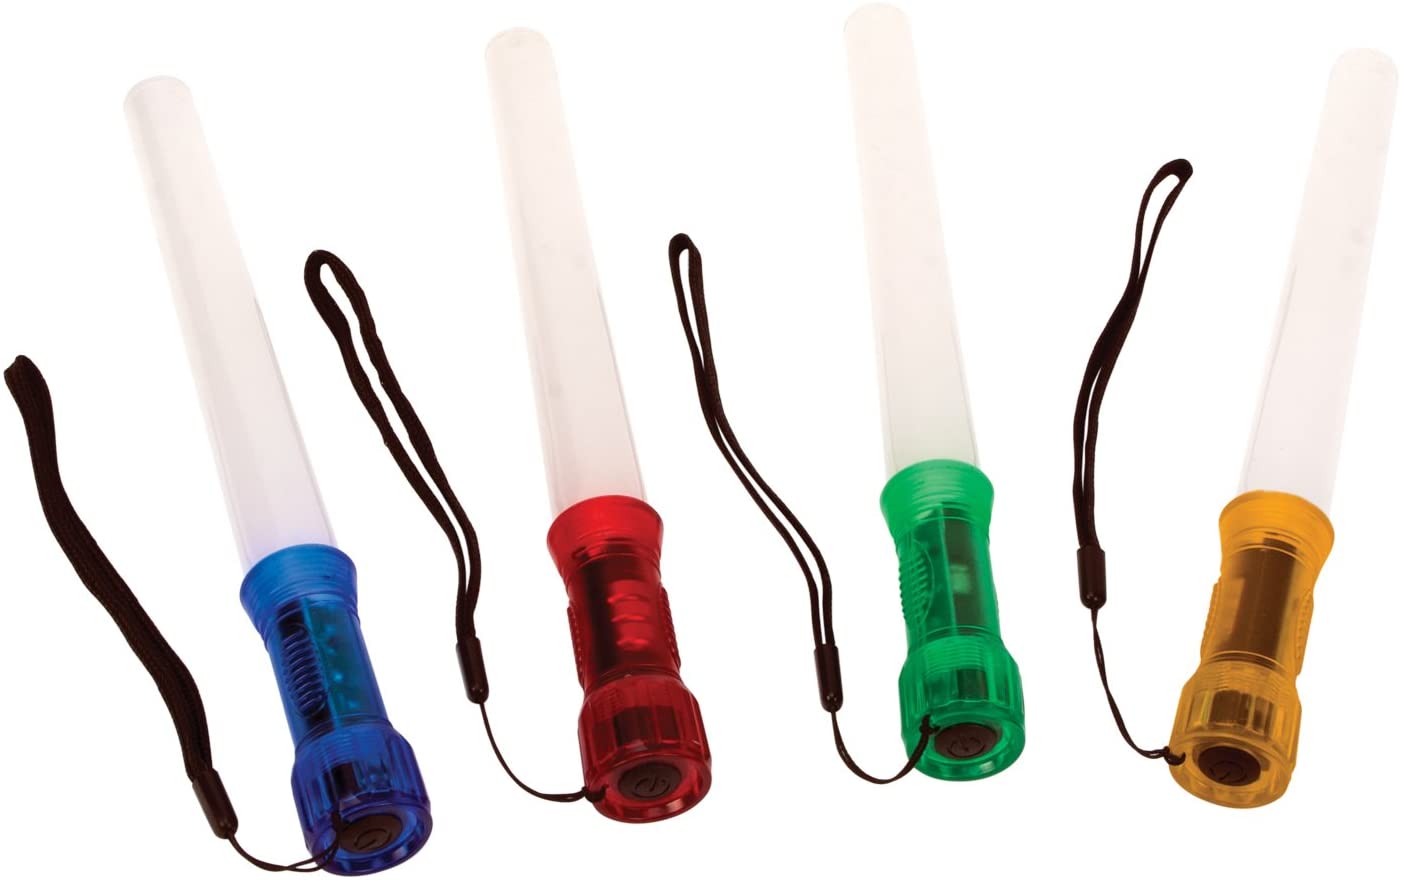 Performance Tool W2349 Red, Amber, Green & Blue LED Glowstick Stick, 4 Pack (Alternative to Chemical Glowsticks)